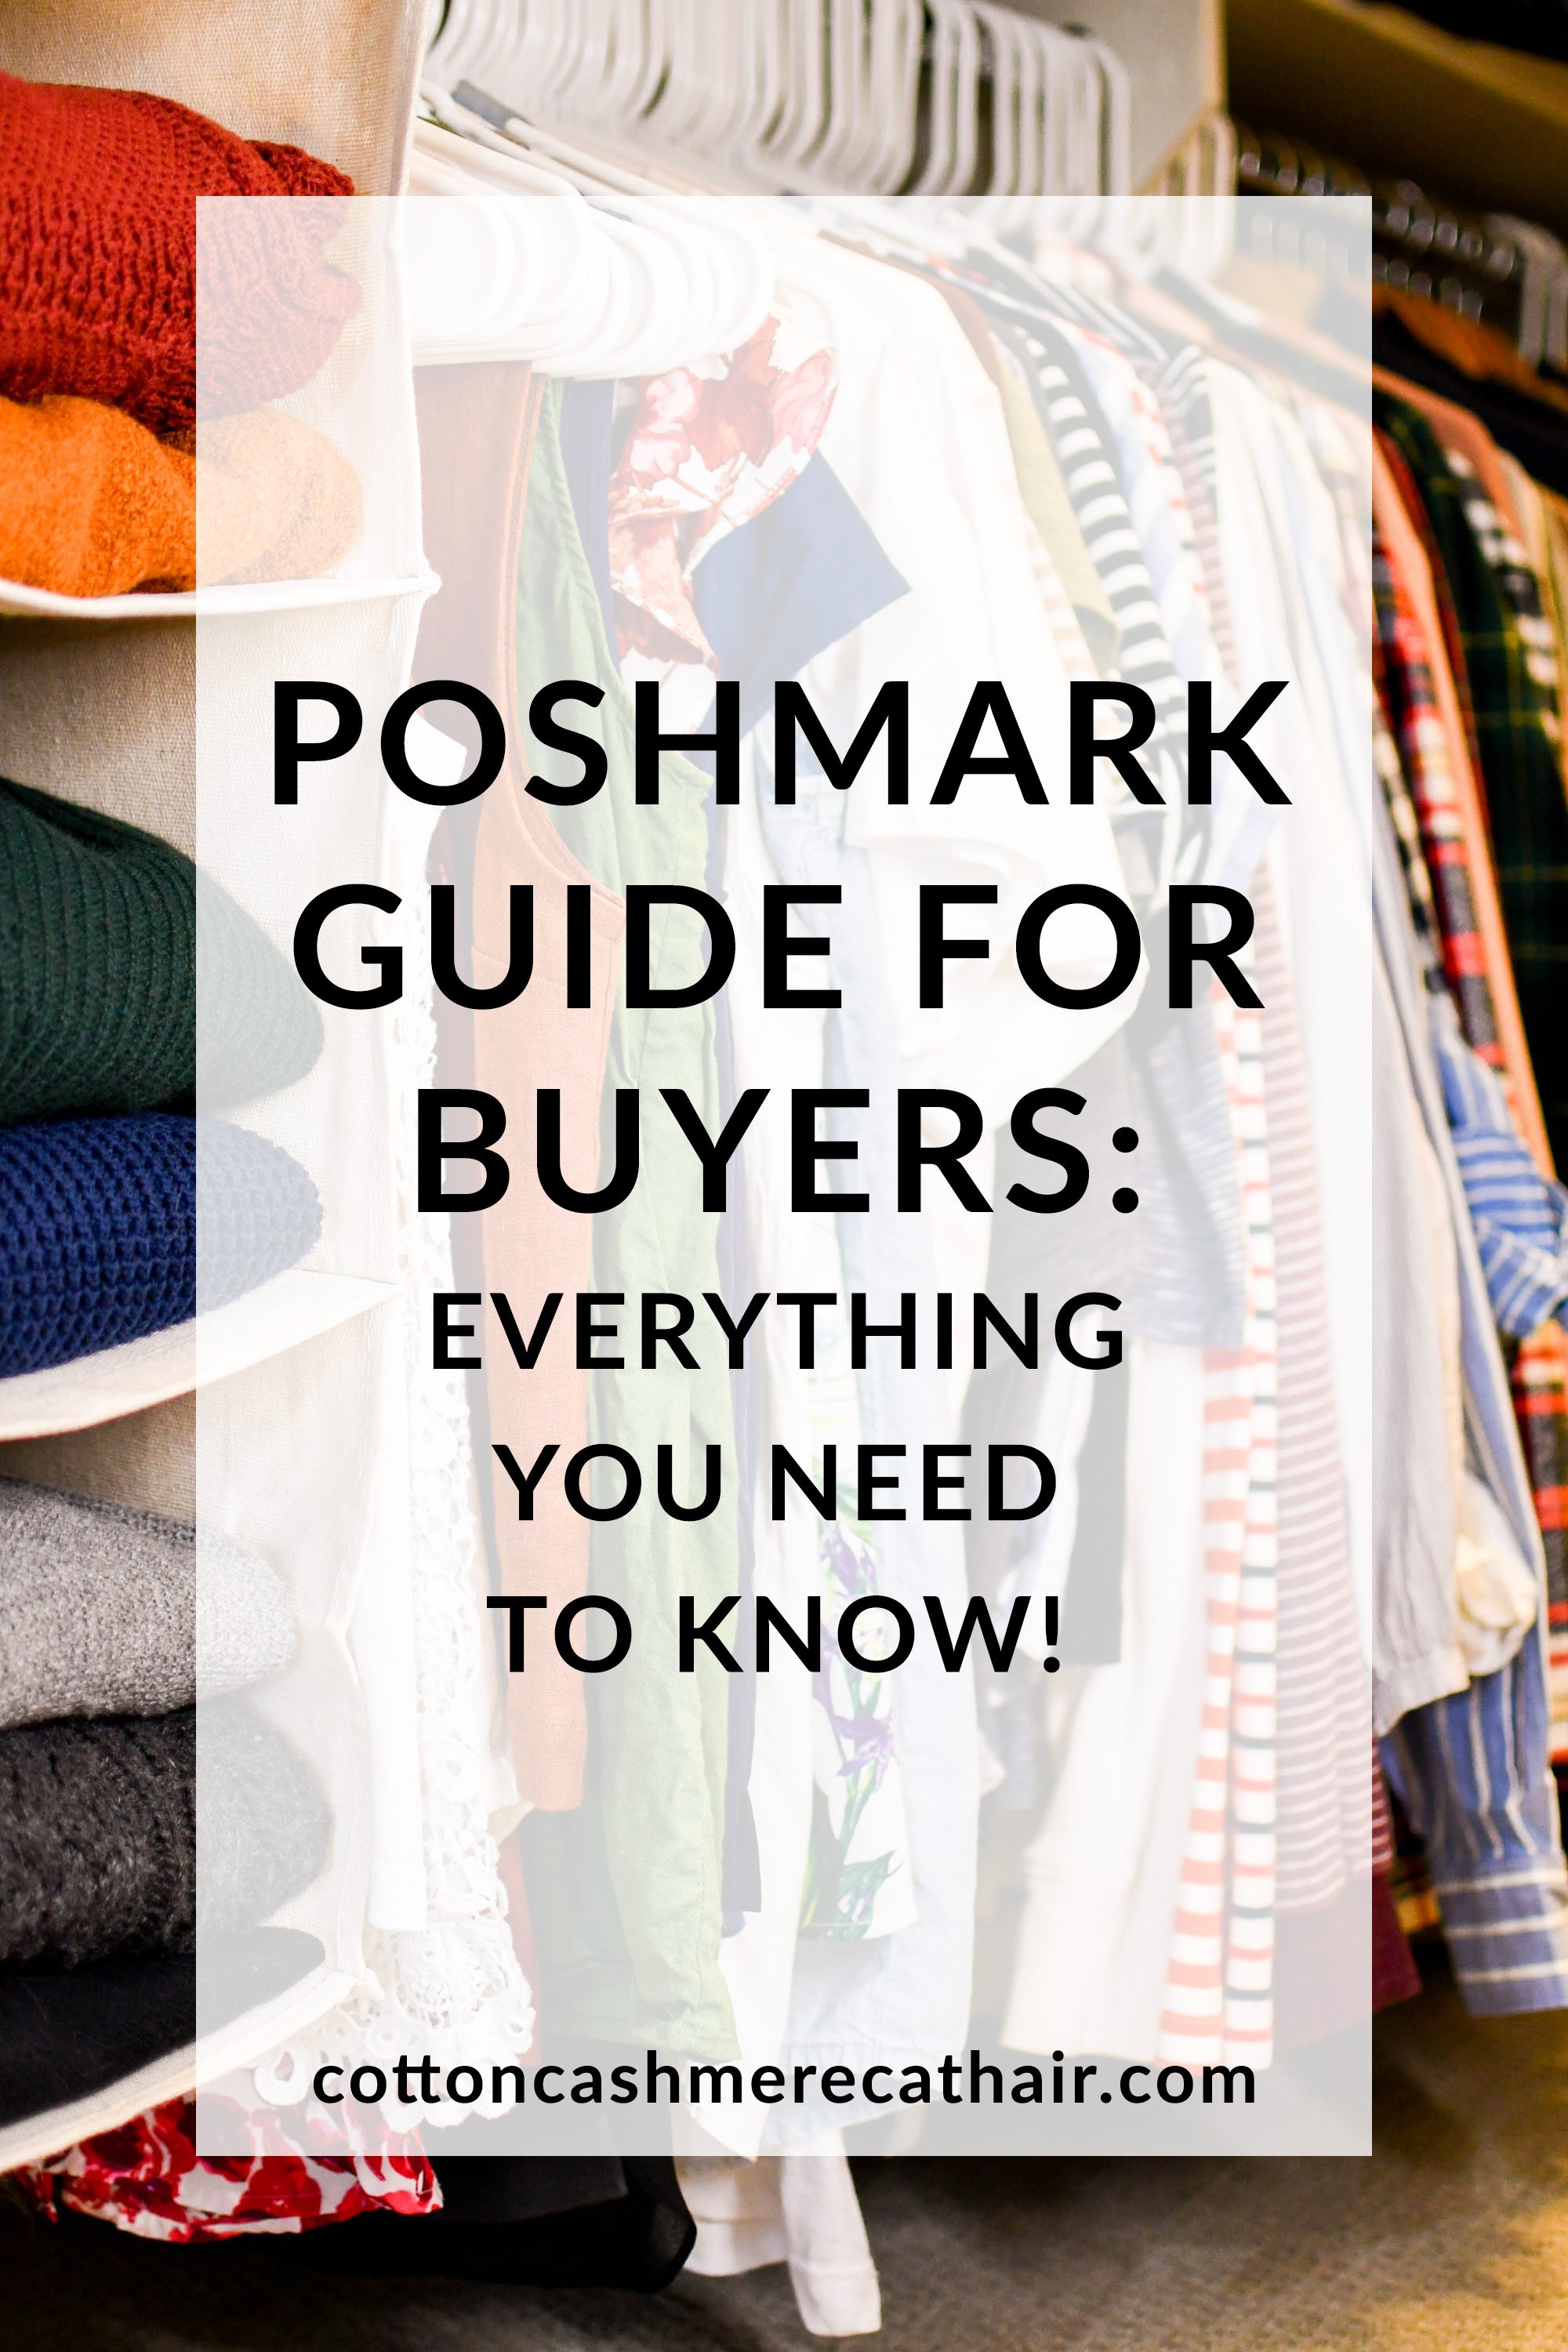 Understanding likes, bundles, shares and other interactions on  Poshmark